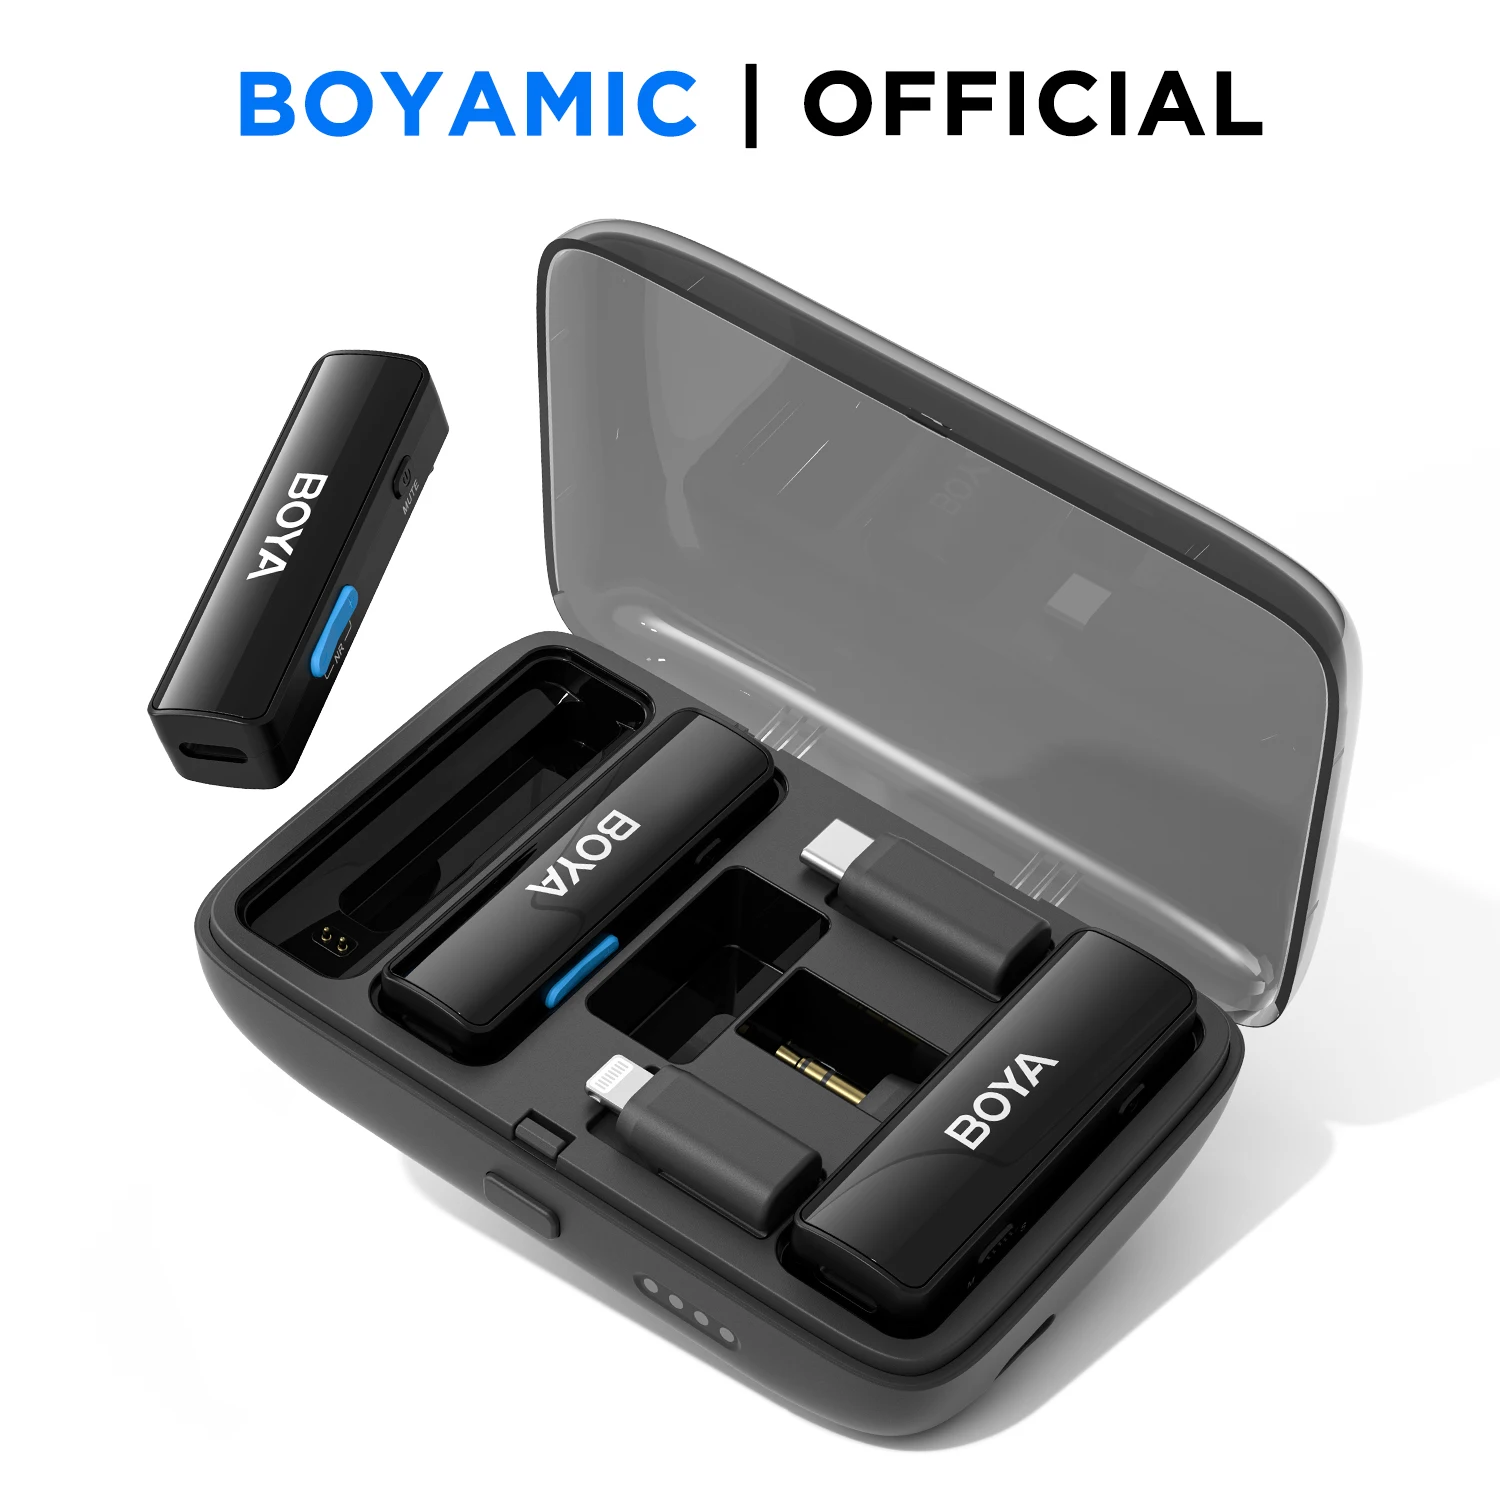 

BOYA BOYALINK Wireless Lavalier Microphone for iPhone Android Camera Smartphone Broadcast Live Streaming Vlog with Charging Case